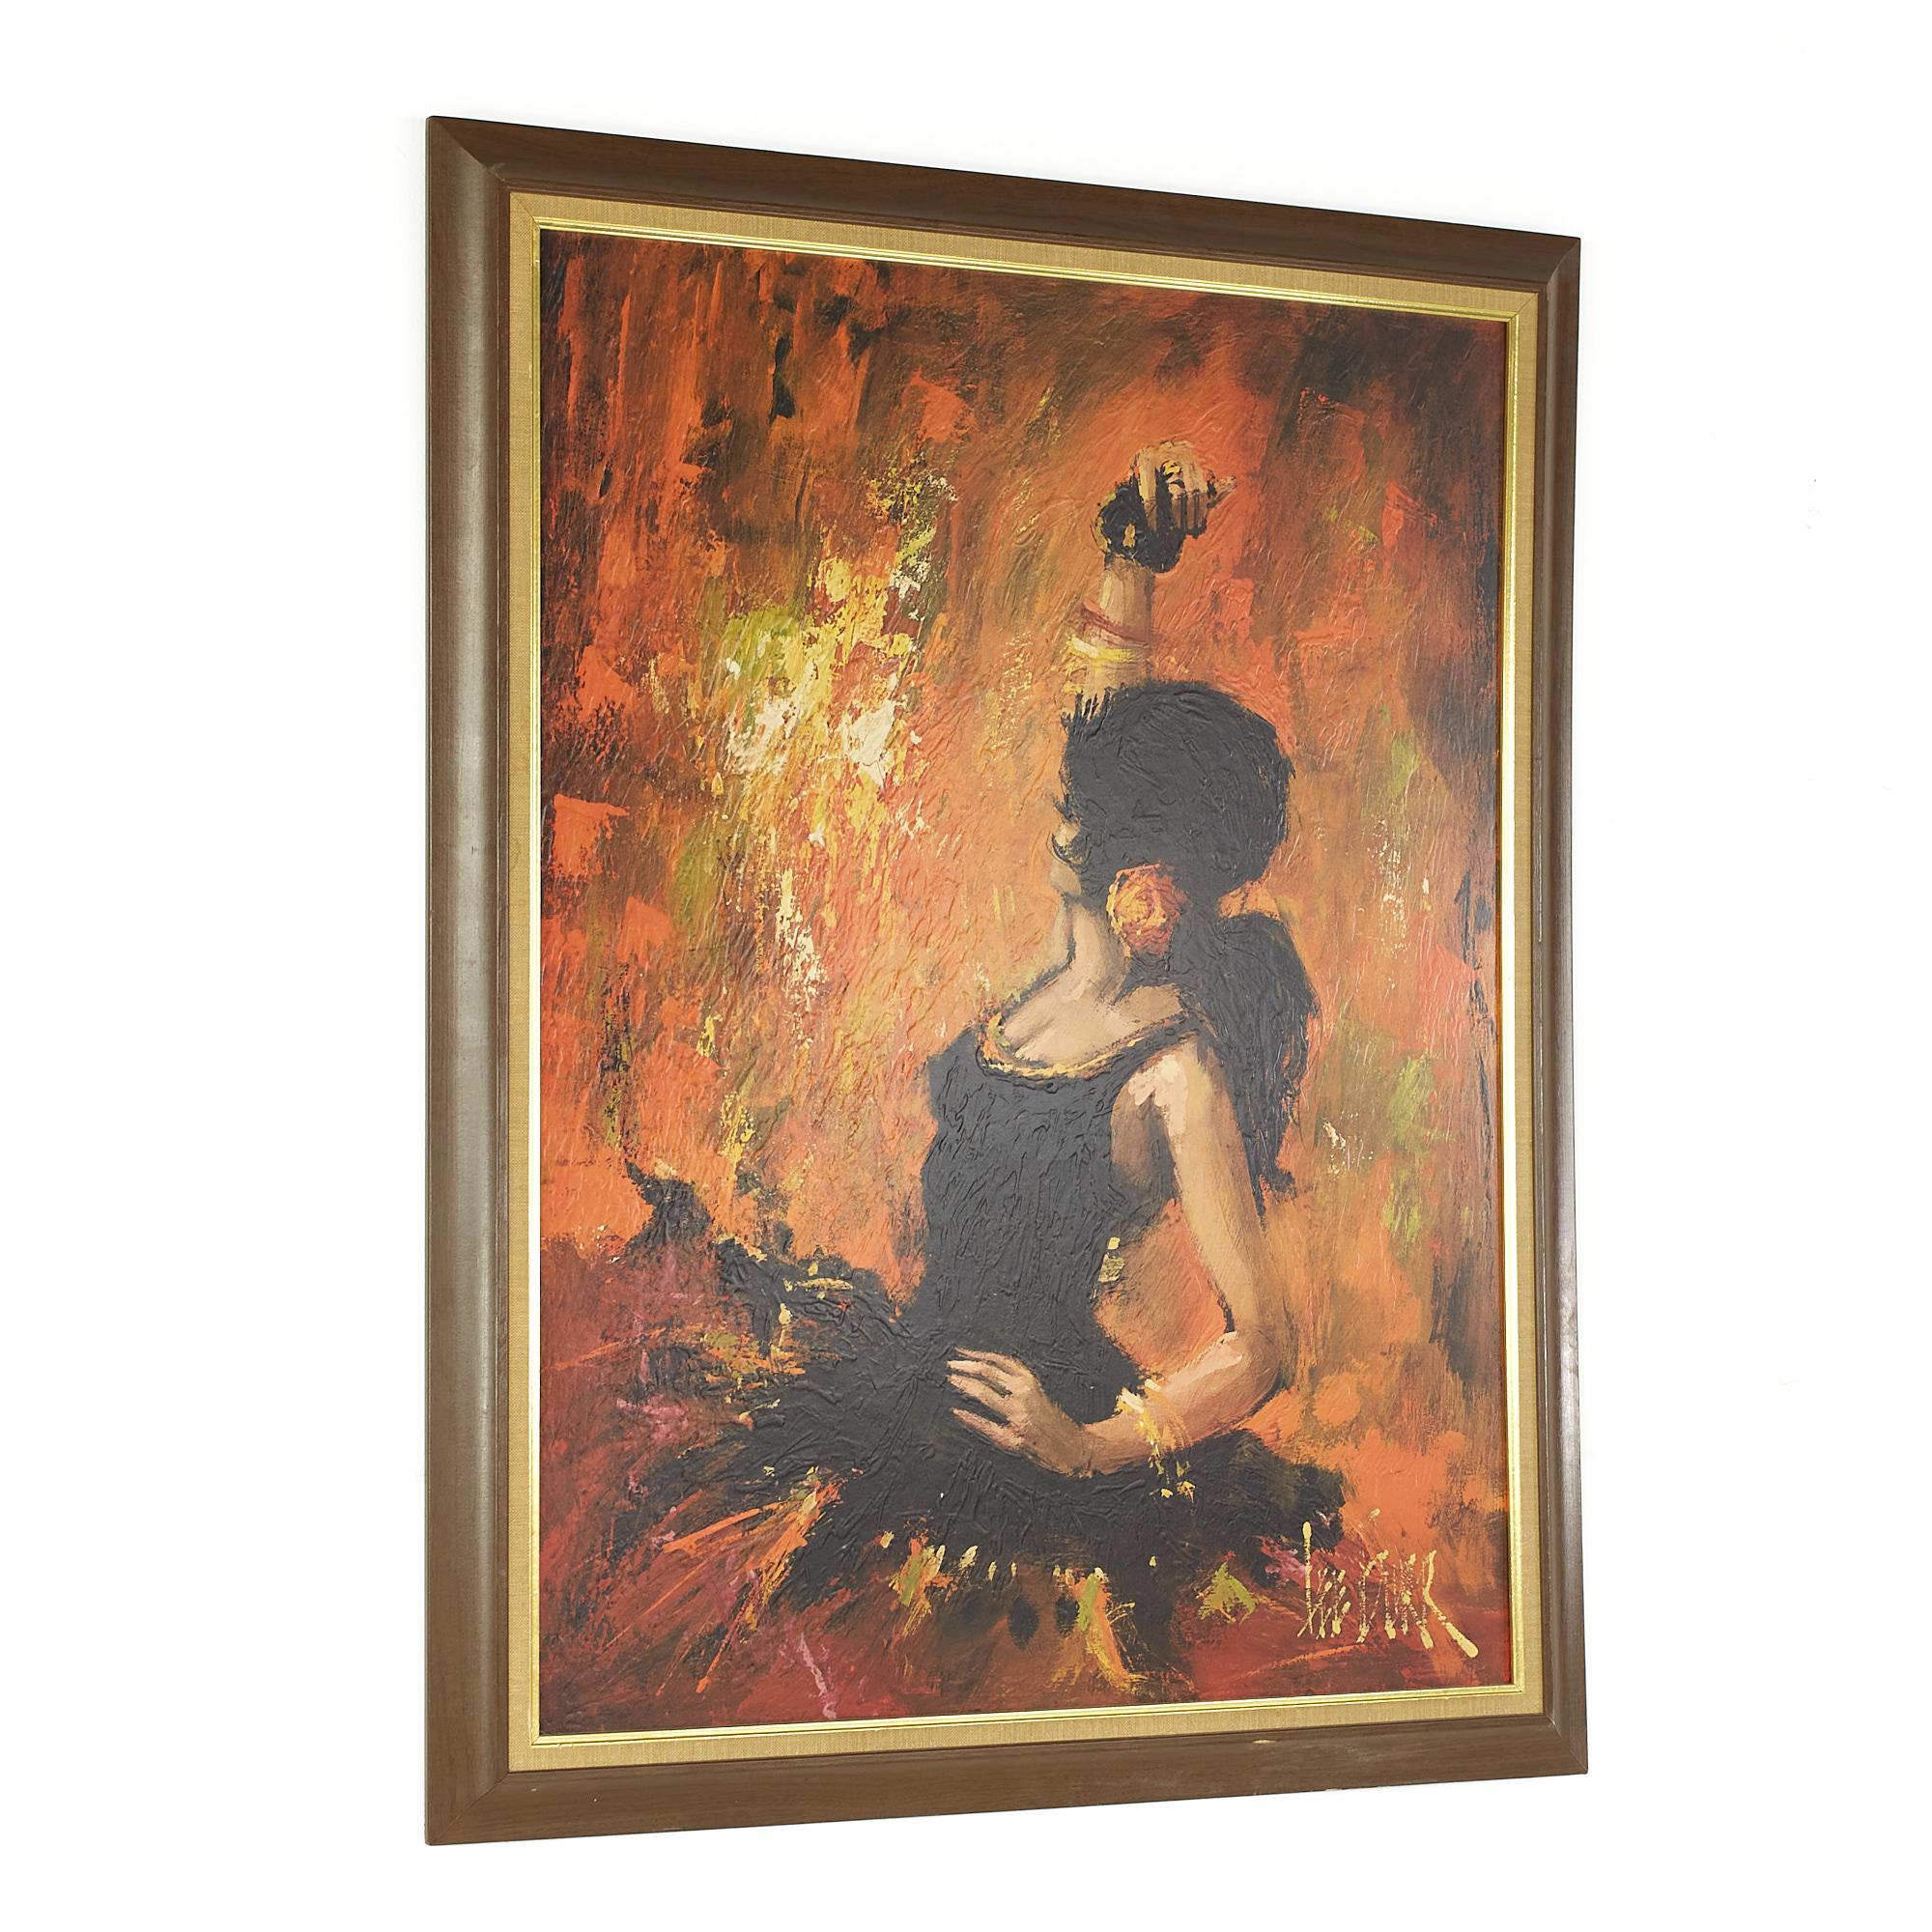 Mid Century Framed Print of Woman Dancing

This print measures: 35.25 wide x 1.75 deep x 45 inches high

This print is in Good Vintage Condition

We take our photos in a controlled lighting studio to show as much detail as possible. We do not